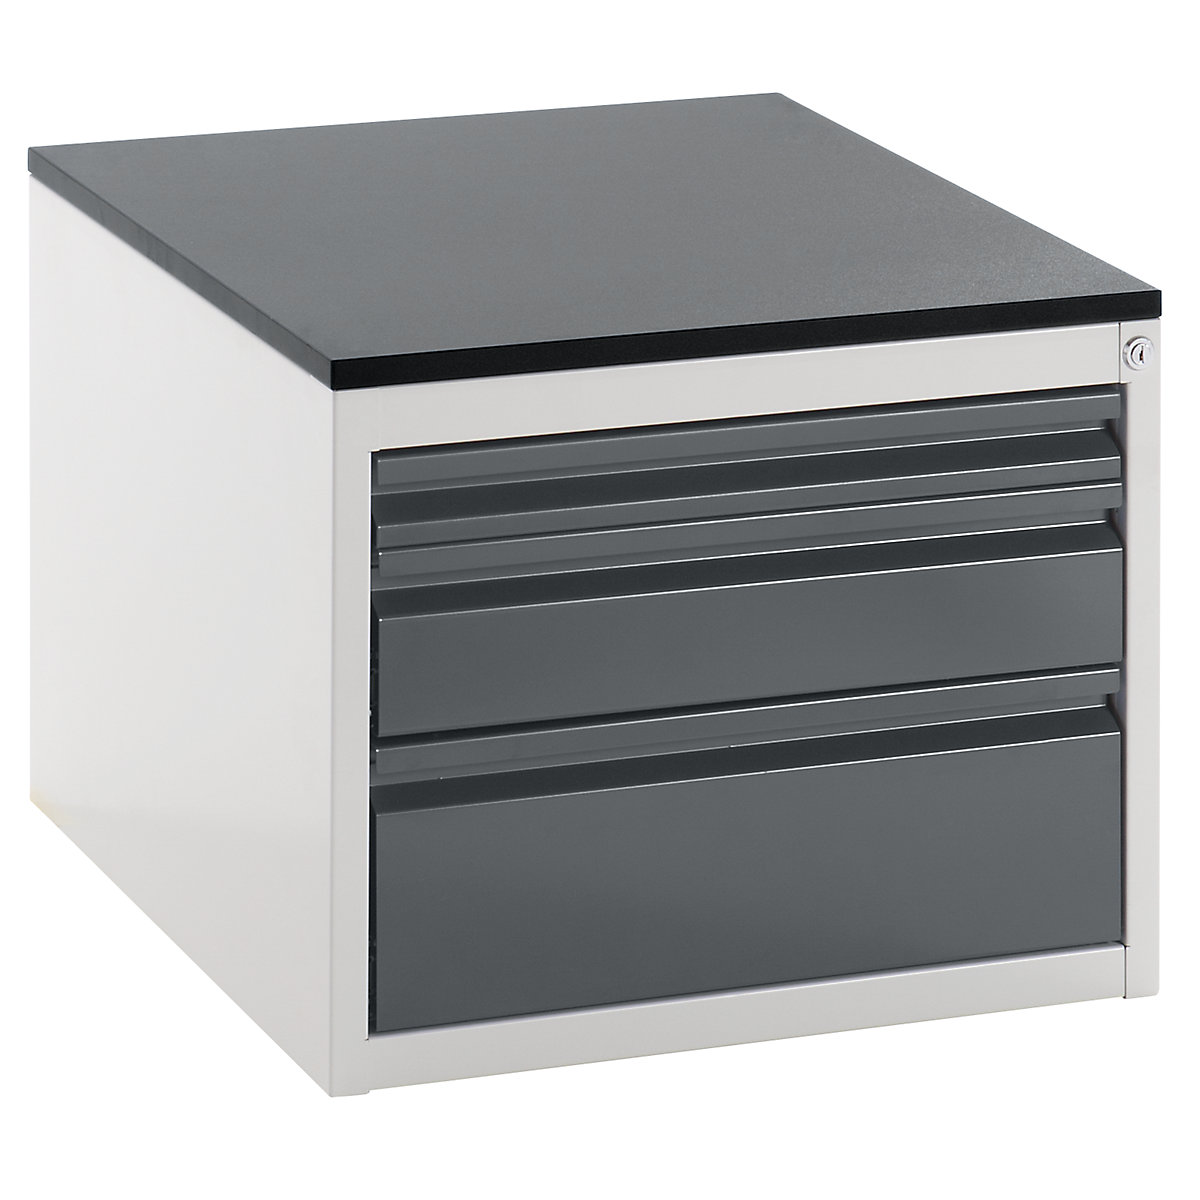 Drawer cupboard with telescopic guides – RAU, height 460 mm, drawers: 1 x 60, 1 x 120, 1 x 180 mm, light grey / metallic charcoal, width 580 mm-13